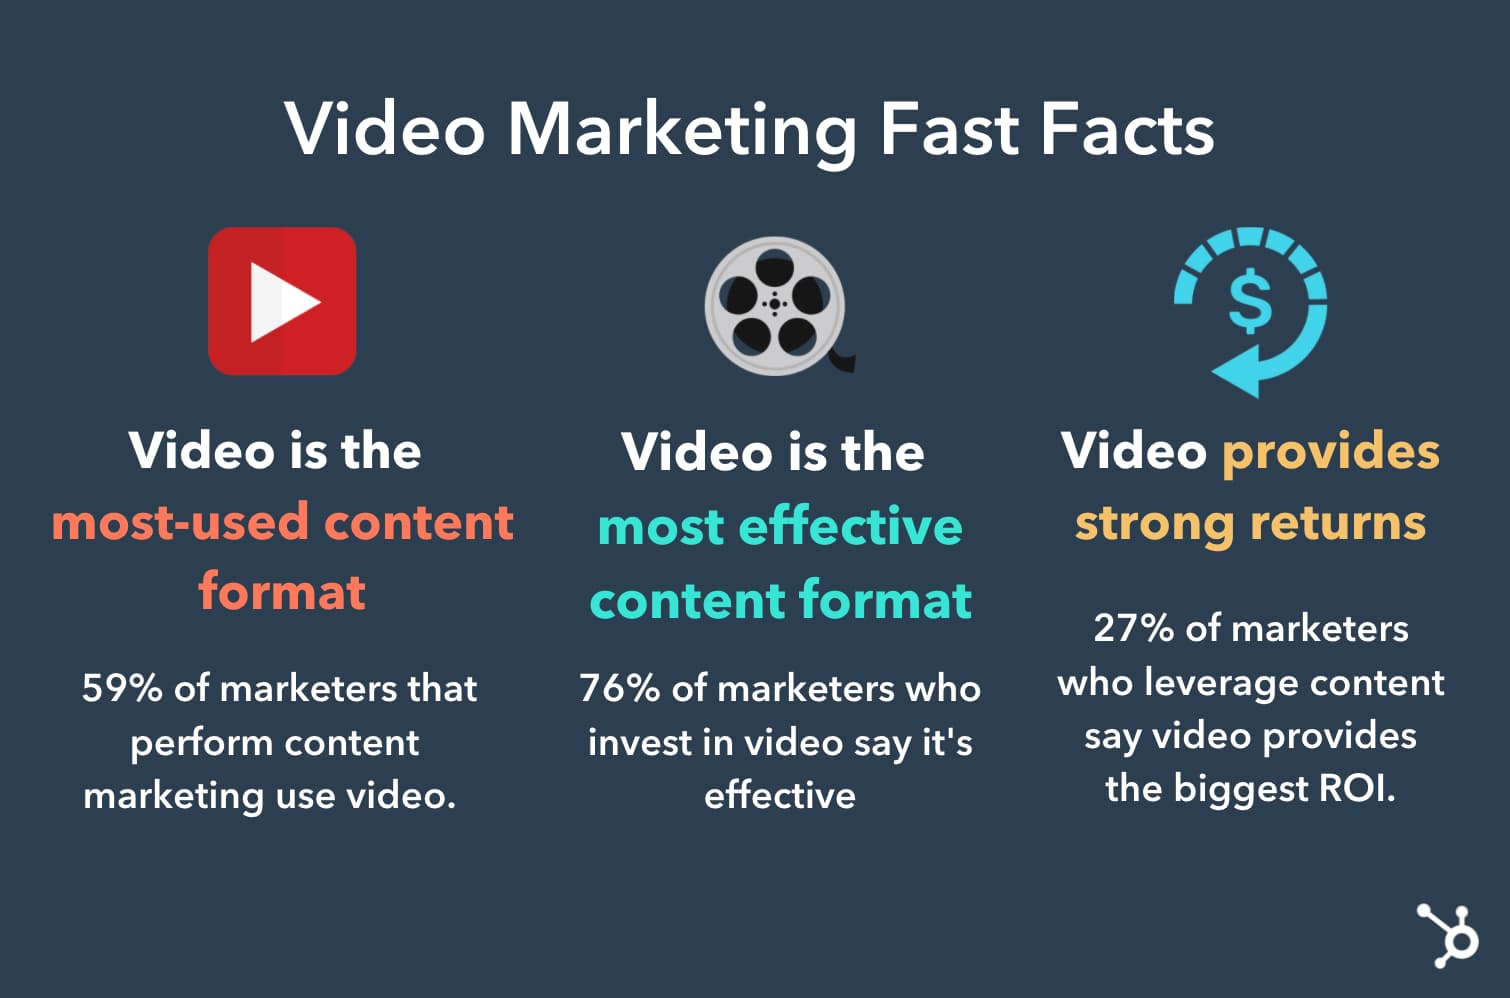 Video Marketing Trends Fast Facts for 2022 